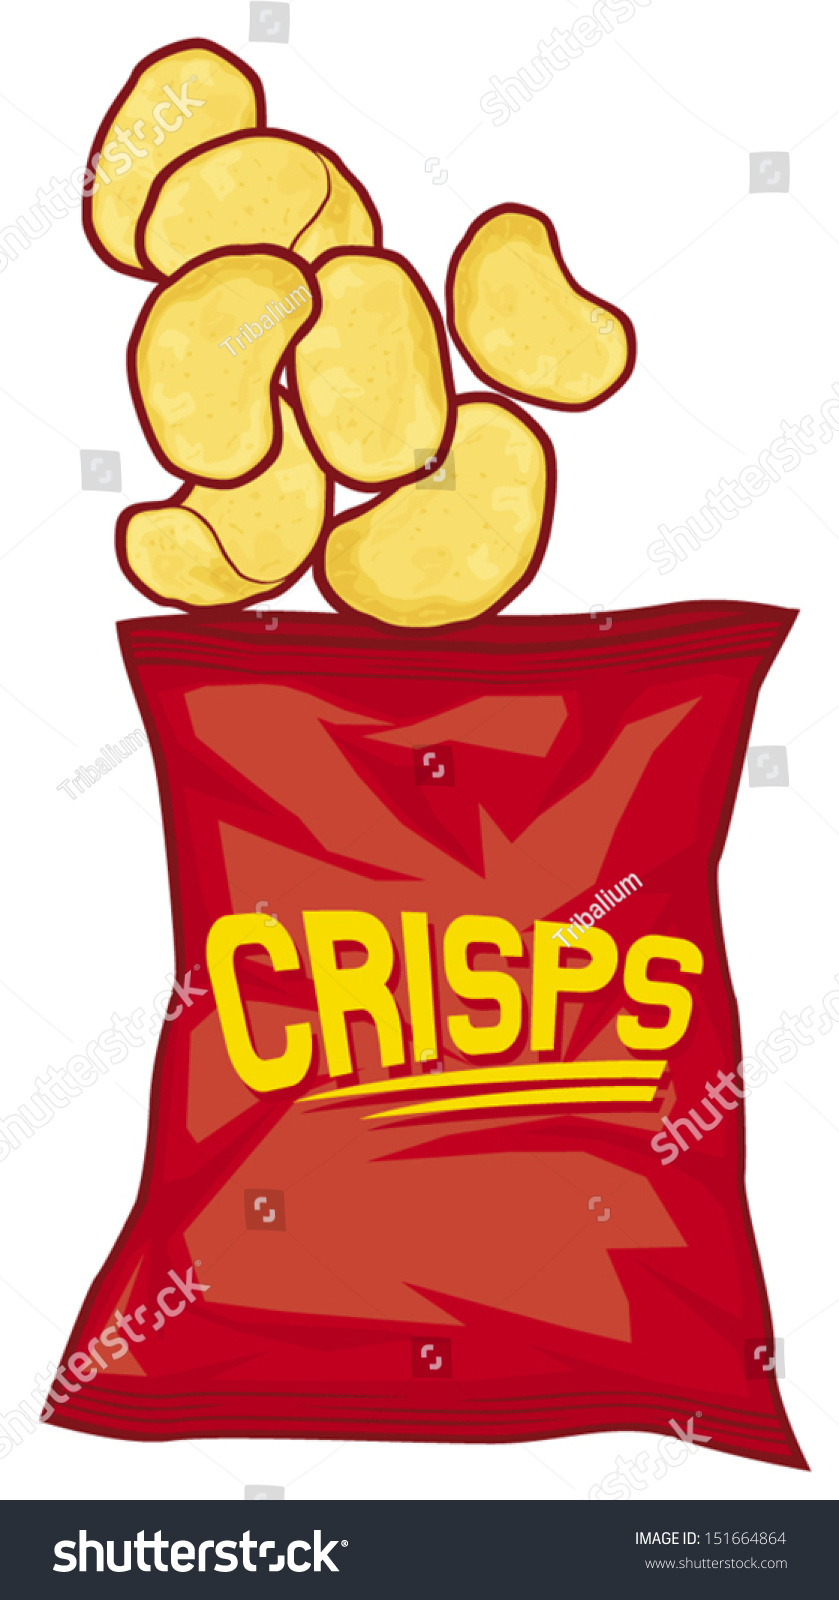 bag of chips clipart - photo #40